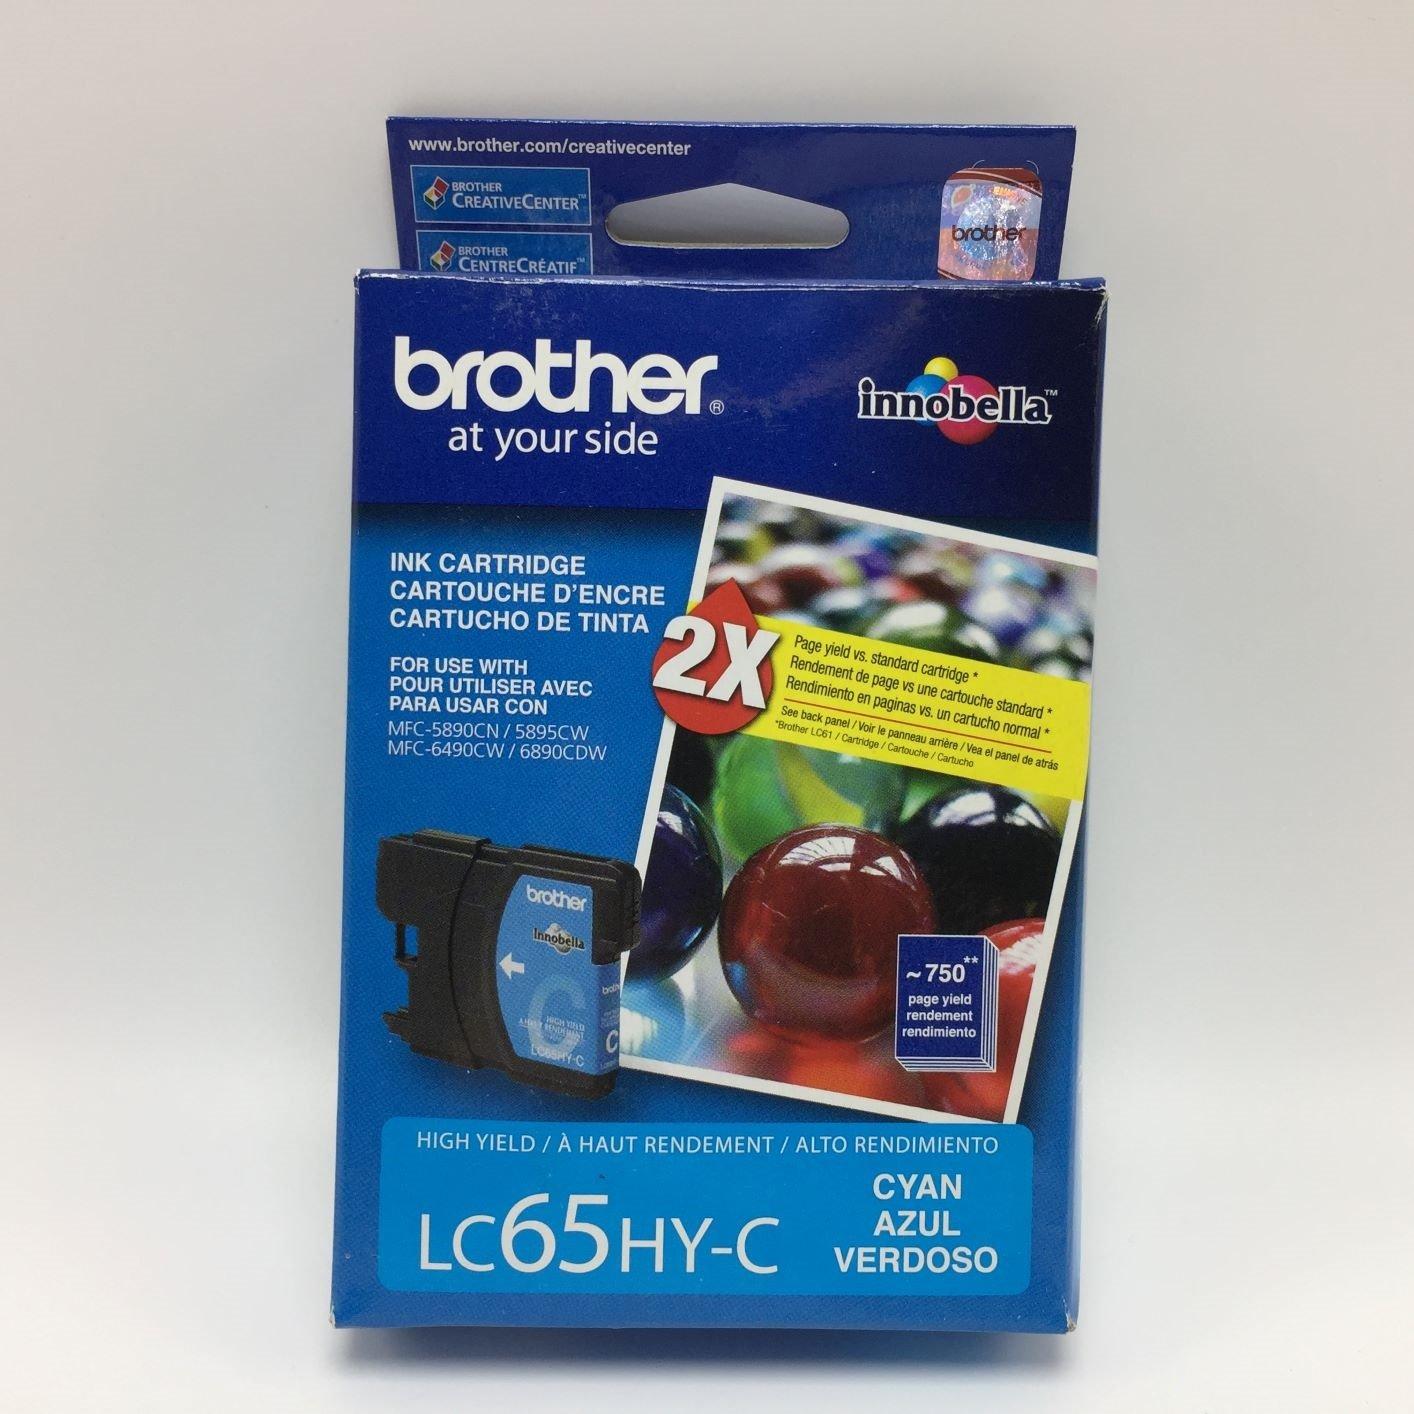 NEW BROTHER LC65HY-C GENUINE HIGH-YIELD INK CARTRIDGE CYAN PN# LC65HY-C 